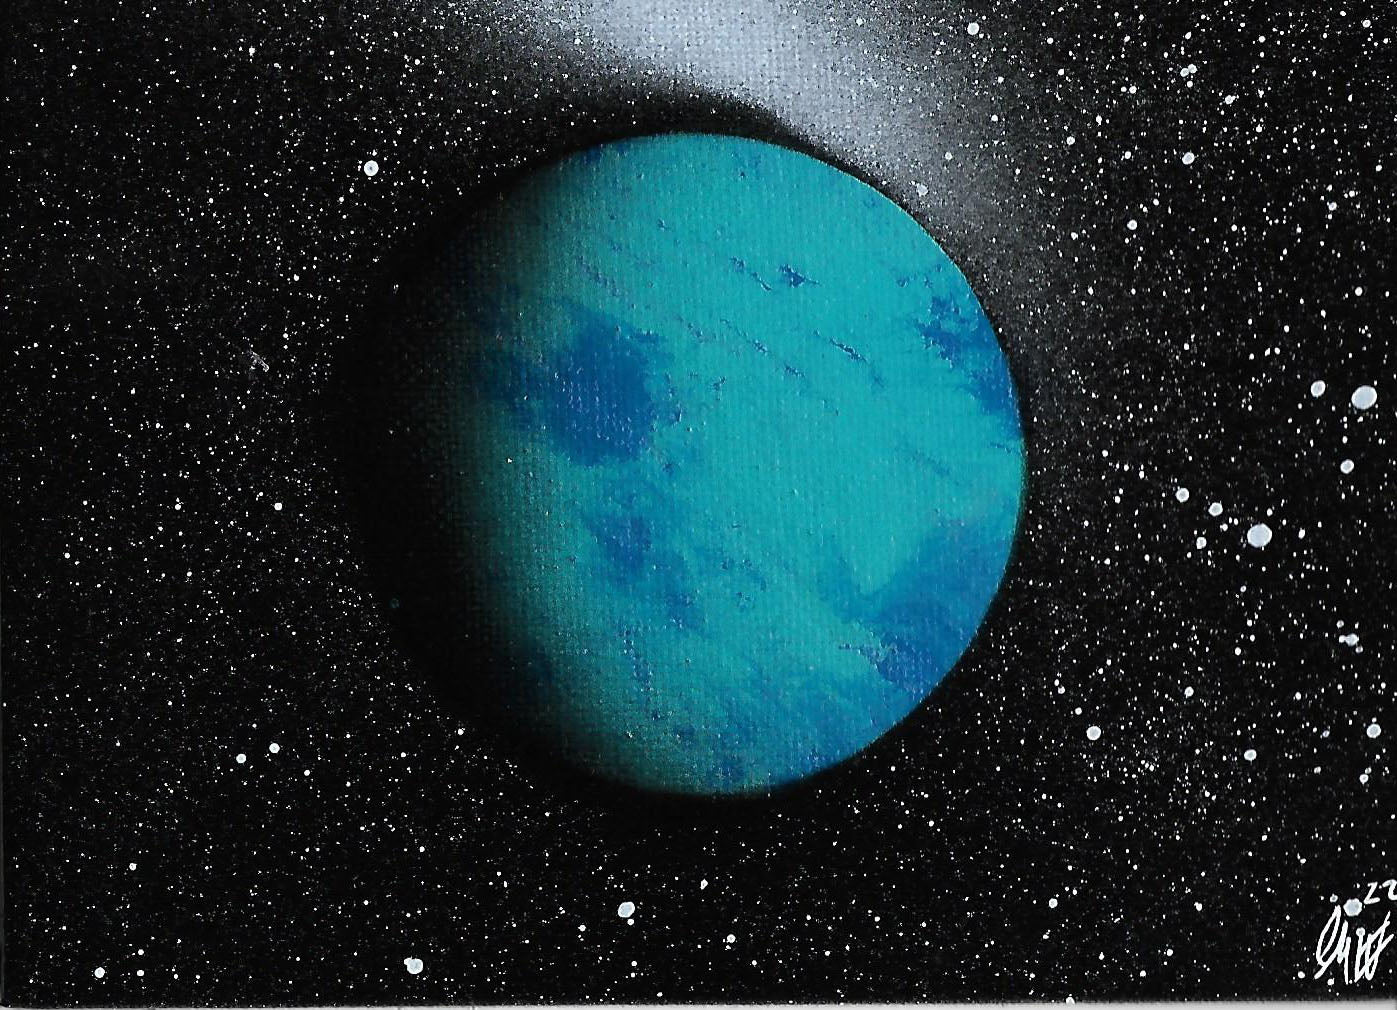 Teal and Blue Planet